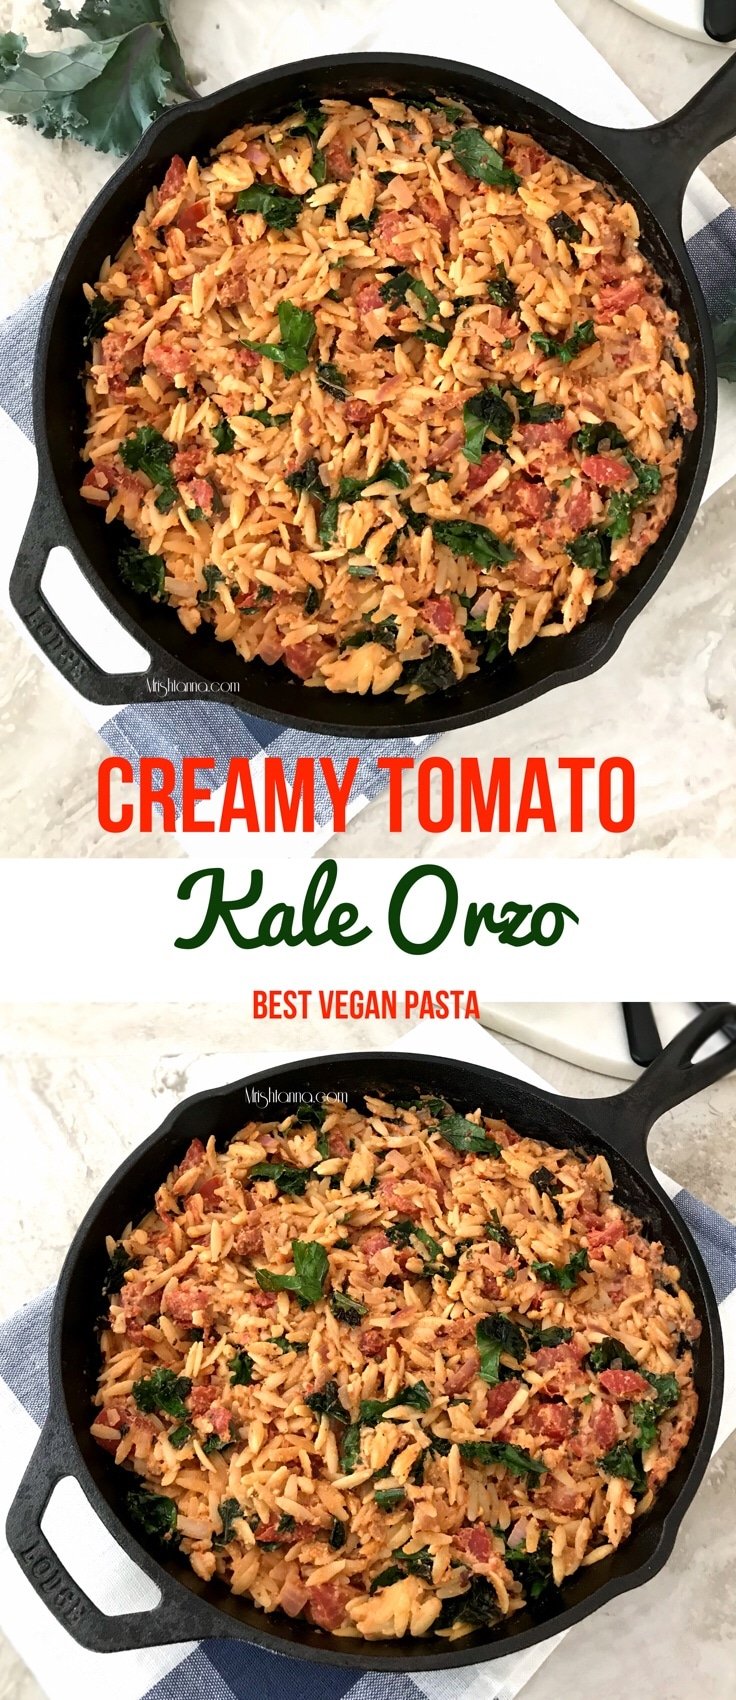 A pan filled with food, with Tomato and Orzo